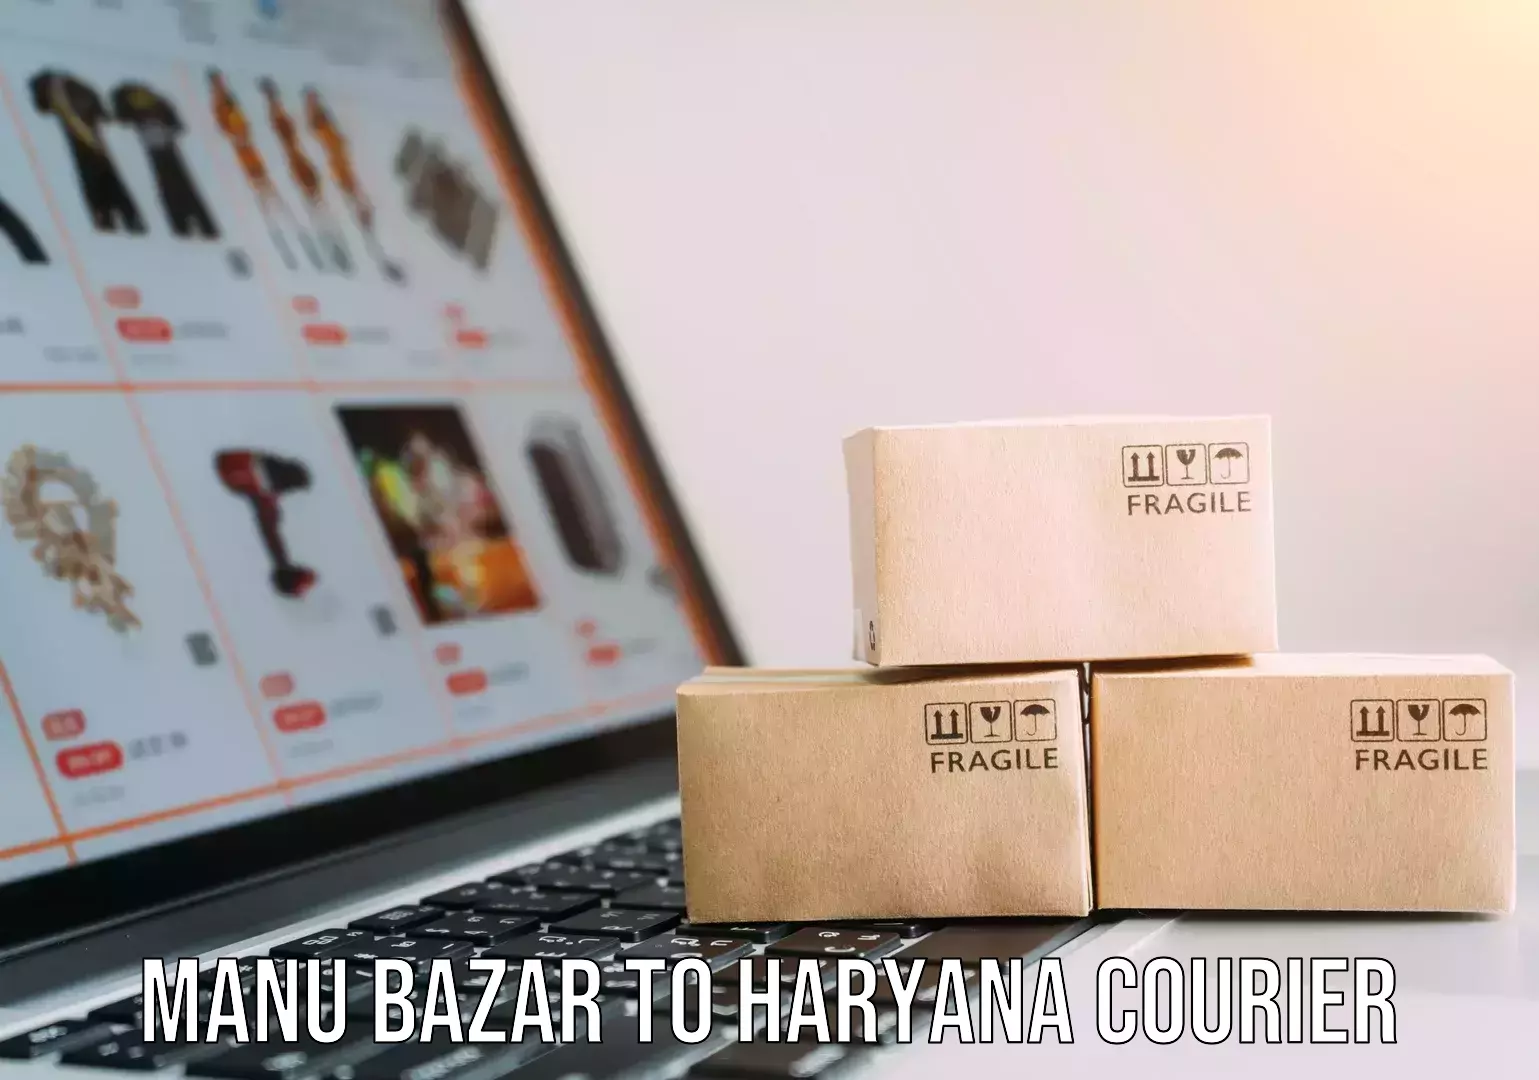 Next-day delivery options Manu Bazar to Haryana